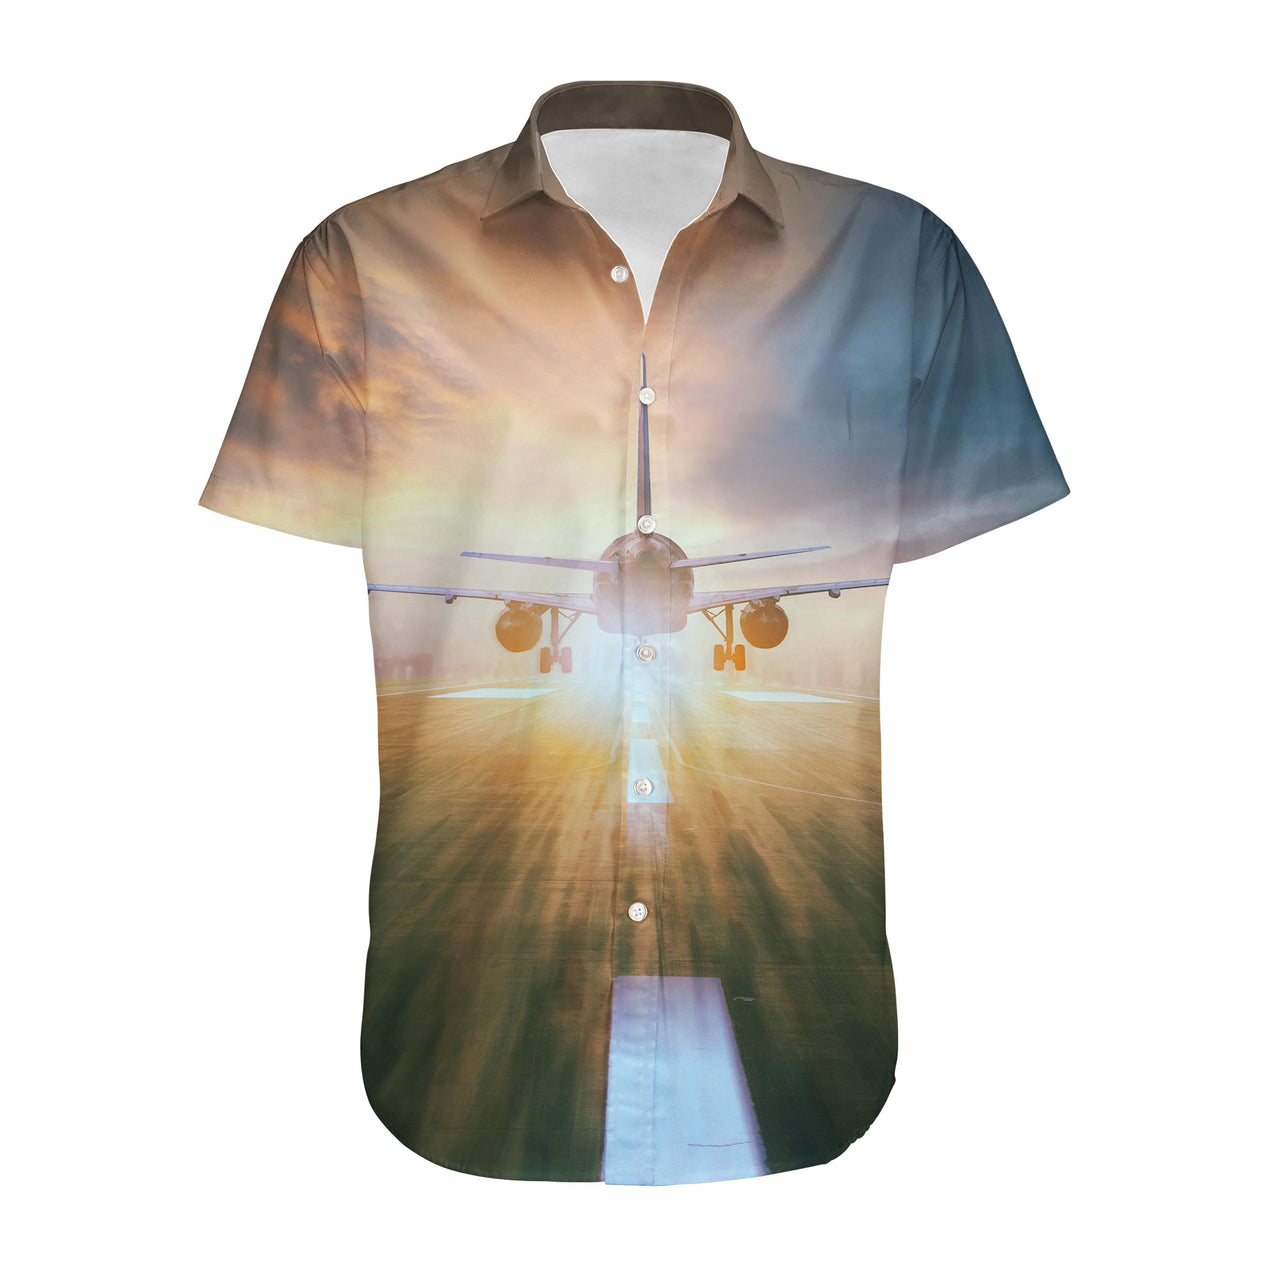 Airplane Flying Over Runway Designed 3D Shirts